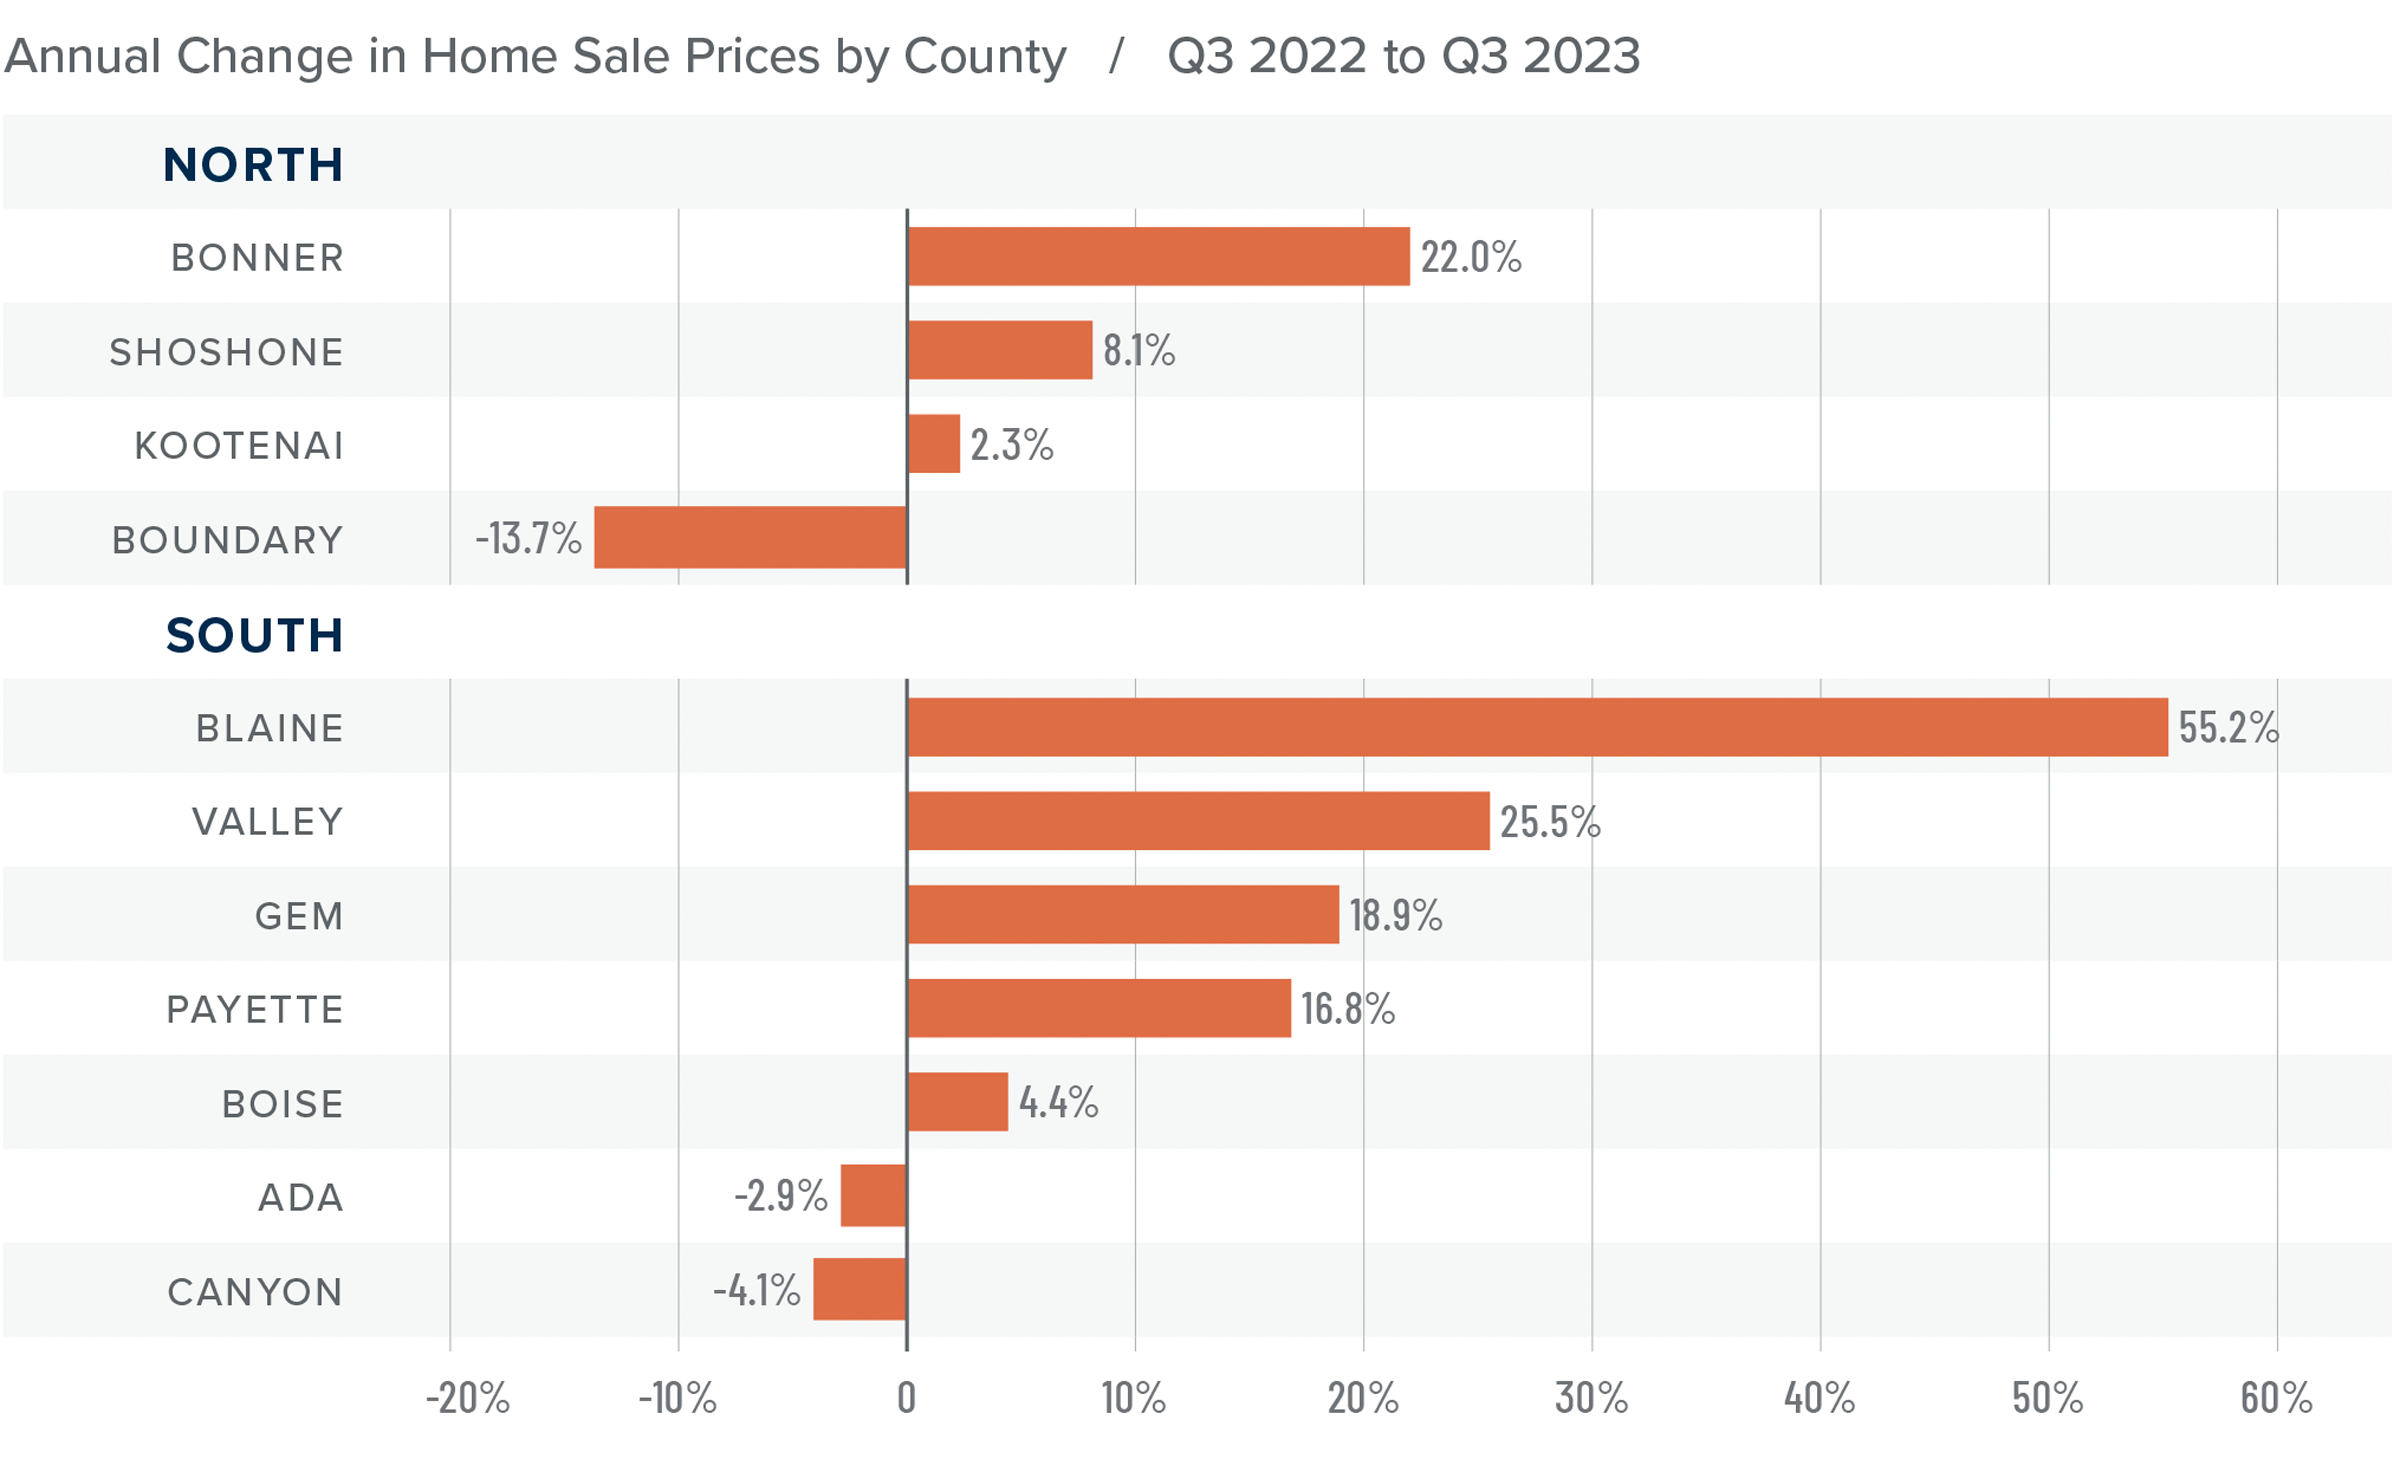 A bar graph showing the annual change in home sale prices by county in North and South Idaho from Q3 2022 to Q3 2023. In the North, Kootenai had the least change at 2.3% while Bonner had the greatest increase of 22% and Boundary County had the greatest decrease at 13.7%. In the South, Ada County had the least change at -2.9%, just below is is Canyon with the greatest decrease at 4.1% while the rest of the counties saw increases with Blaine seeing the greatest change at 55.2%, the next greatest increase is Valley at 25.5%.